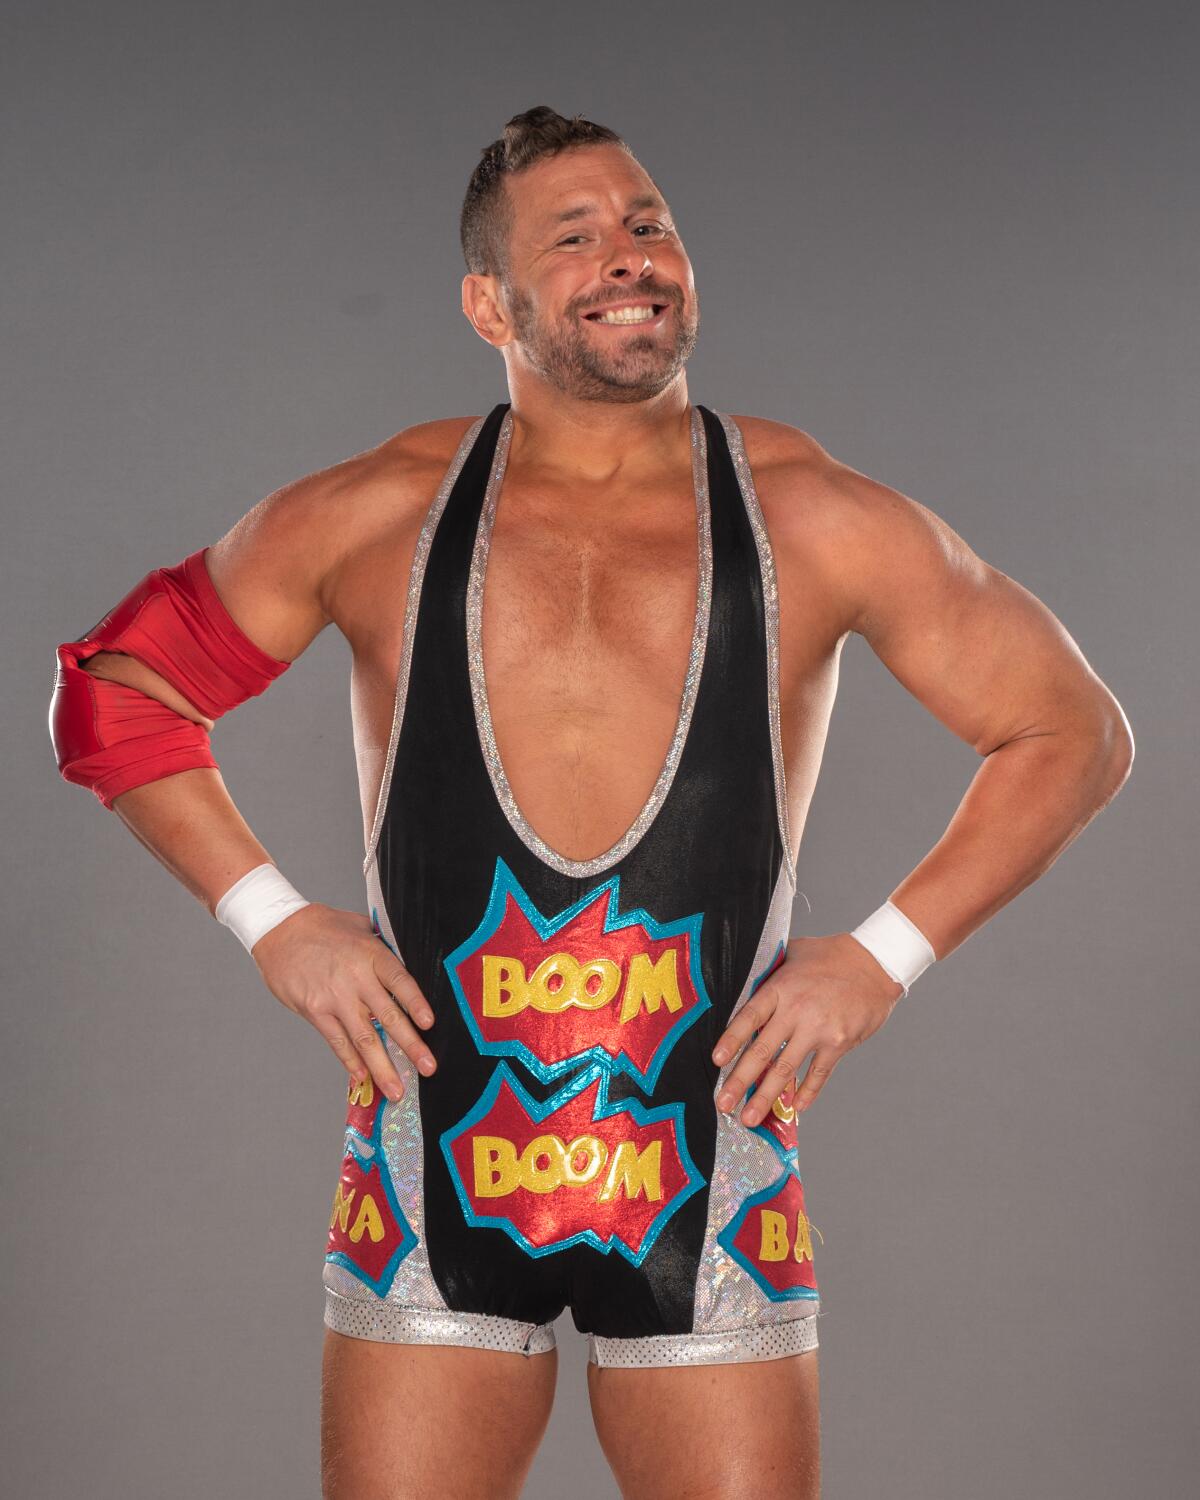 A smiling wrestler whose outfit has the word "boom" printed on it